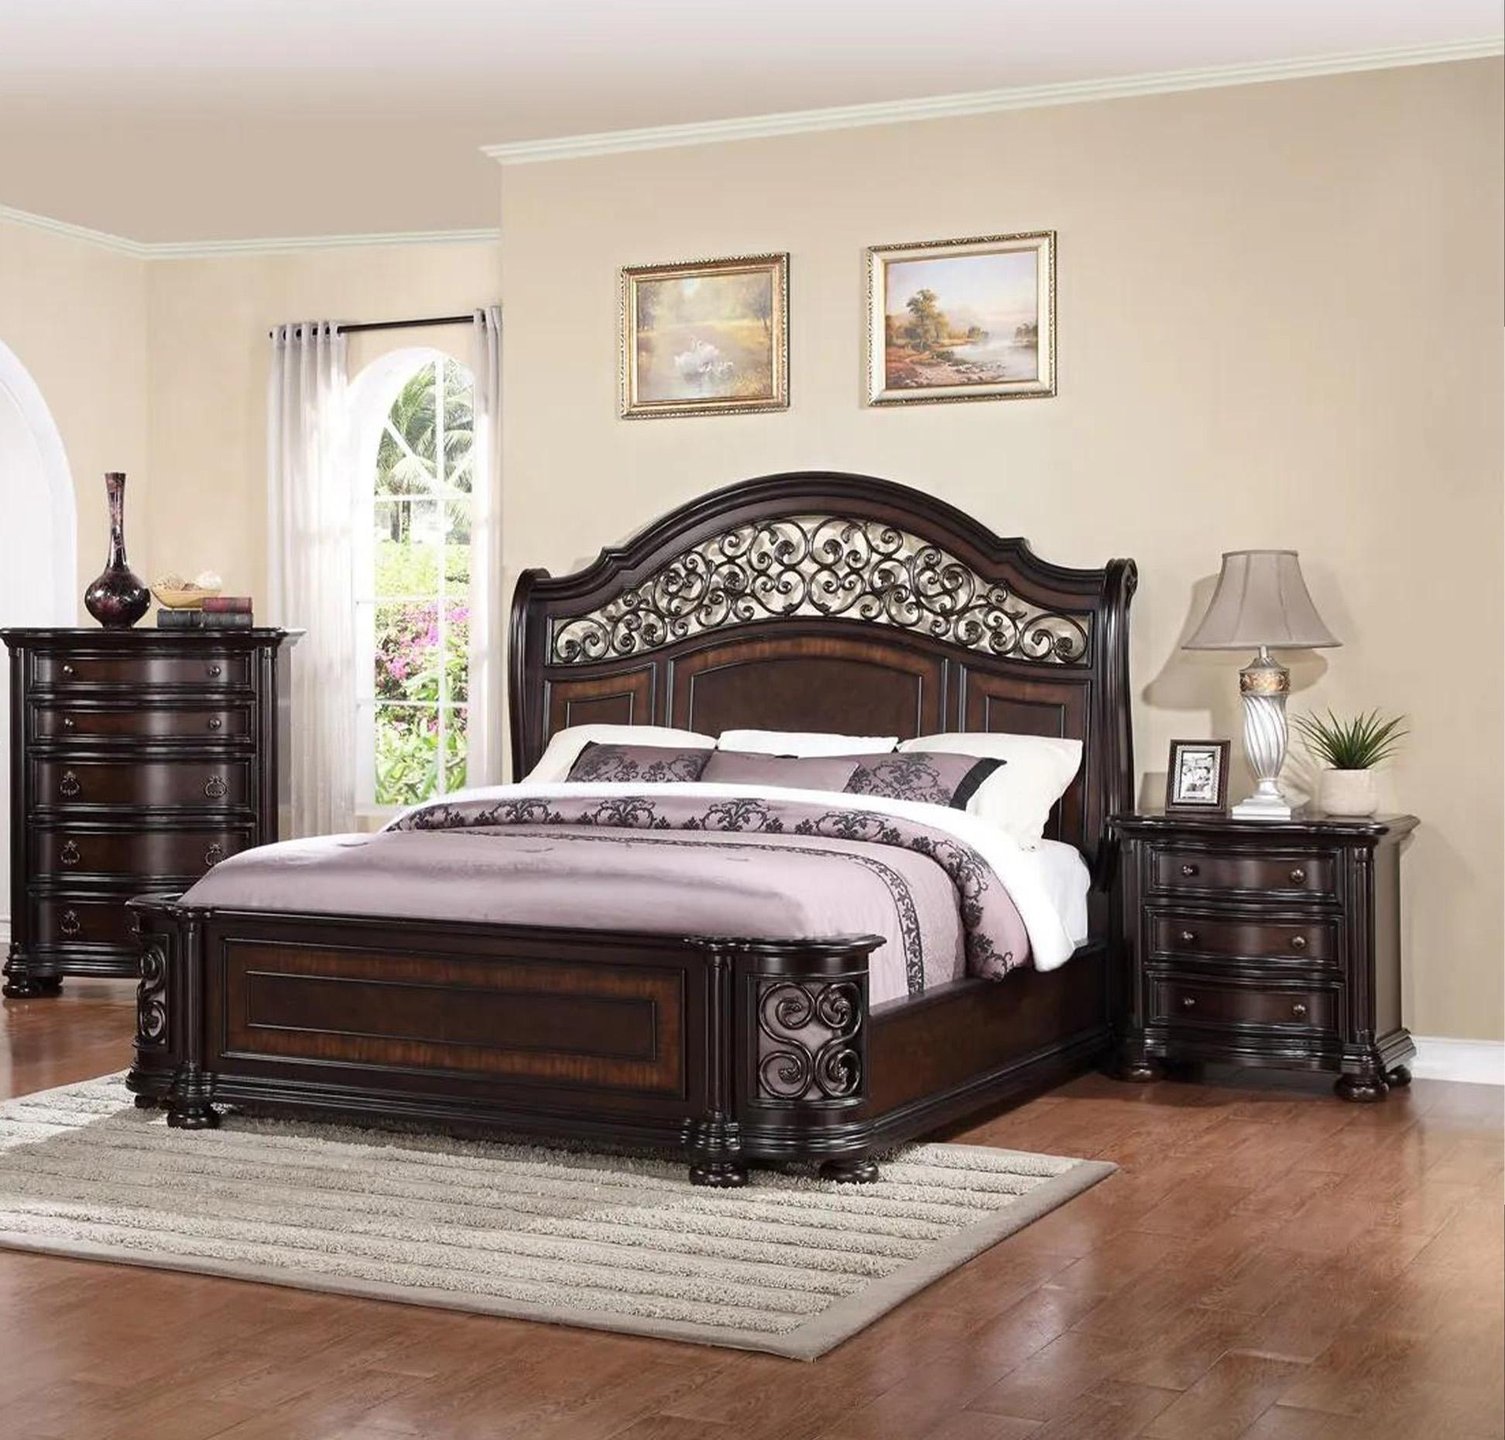 Bedroom Sets, Kitchen & Dining, Bar Stools & Home Office: One Way Furniture